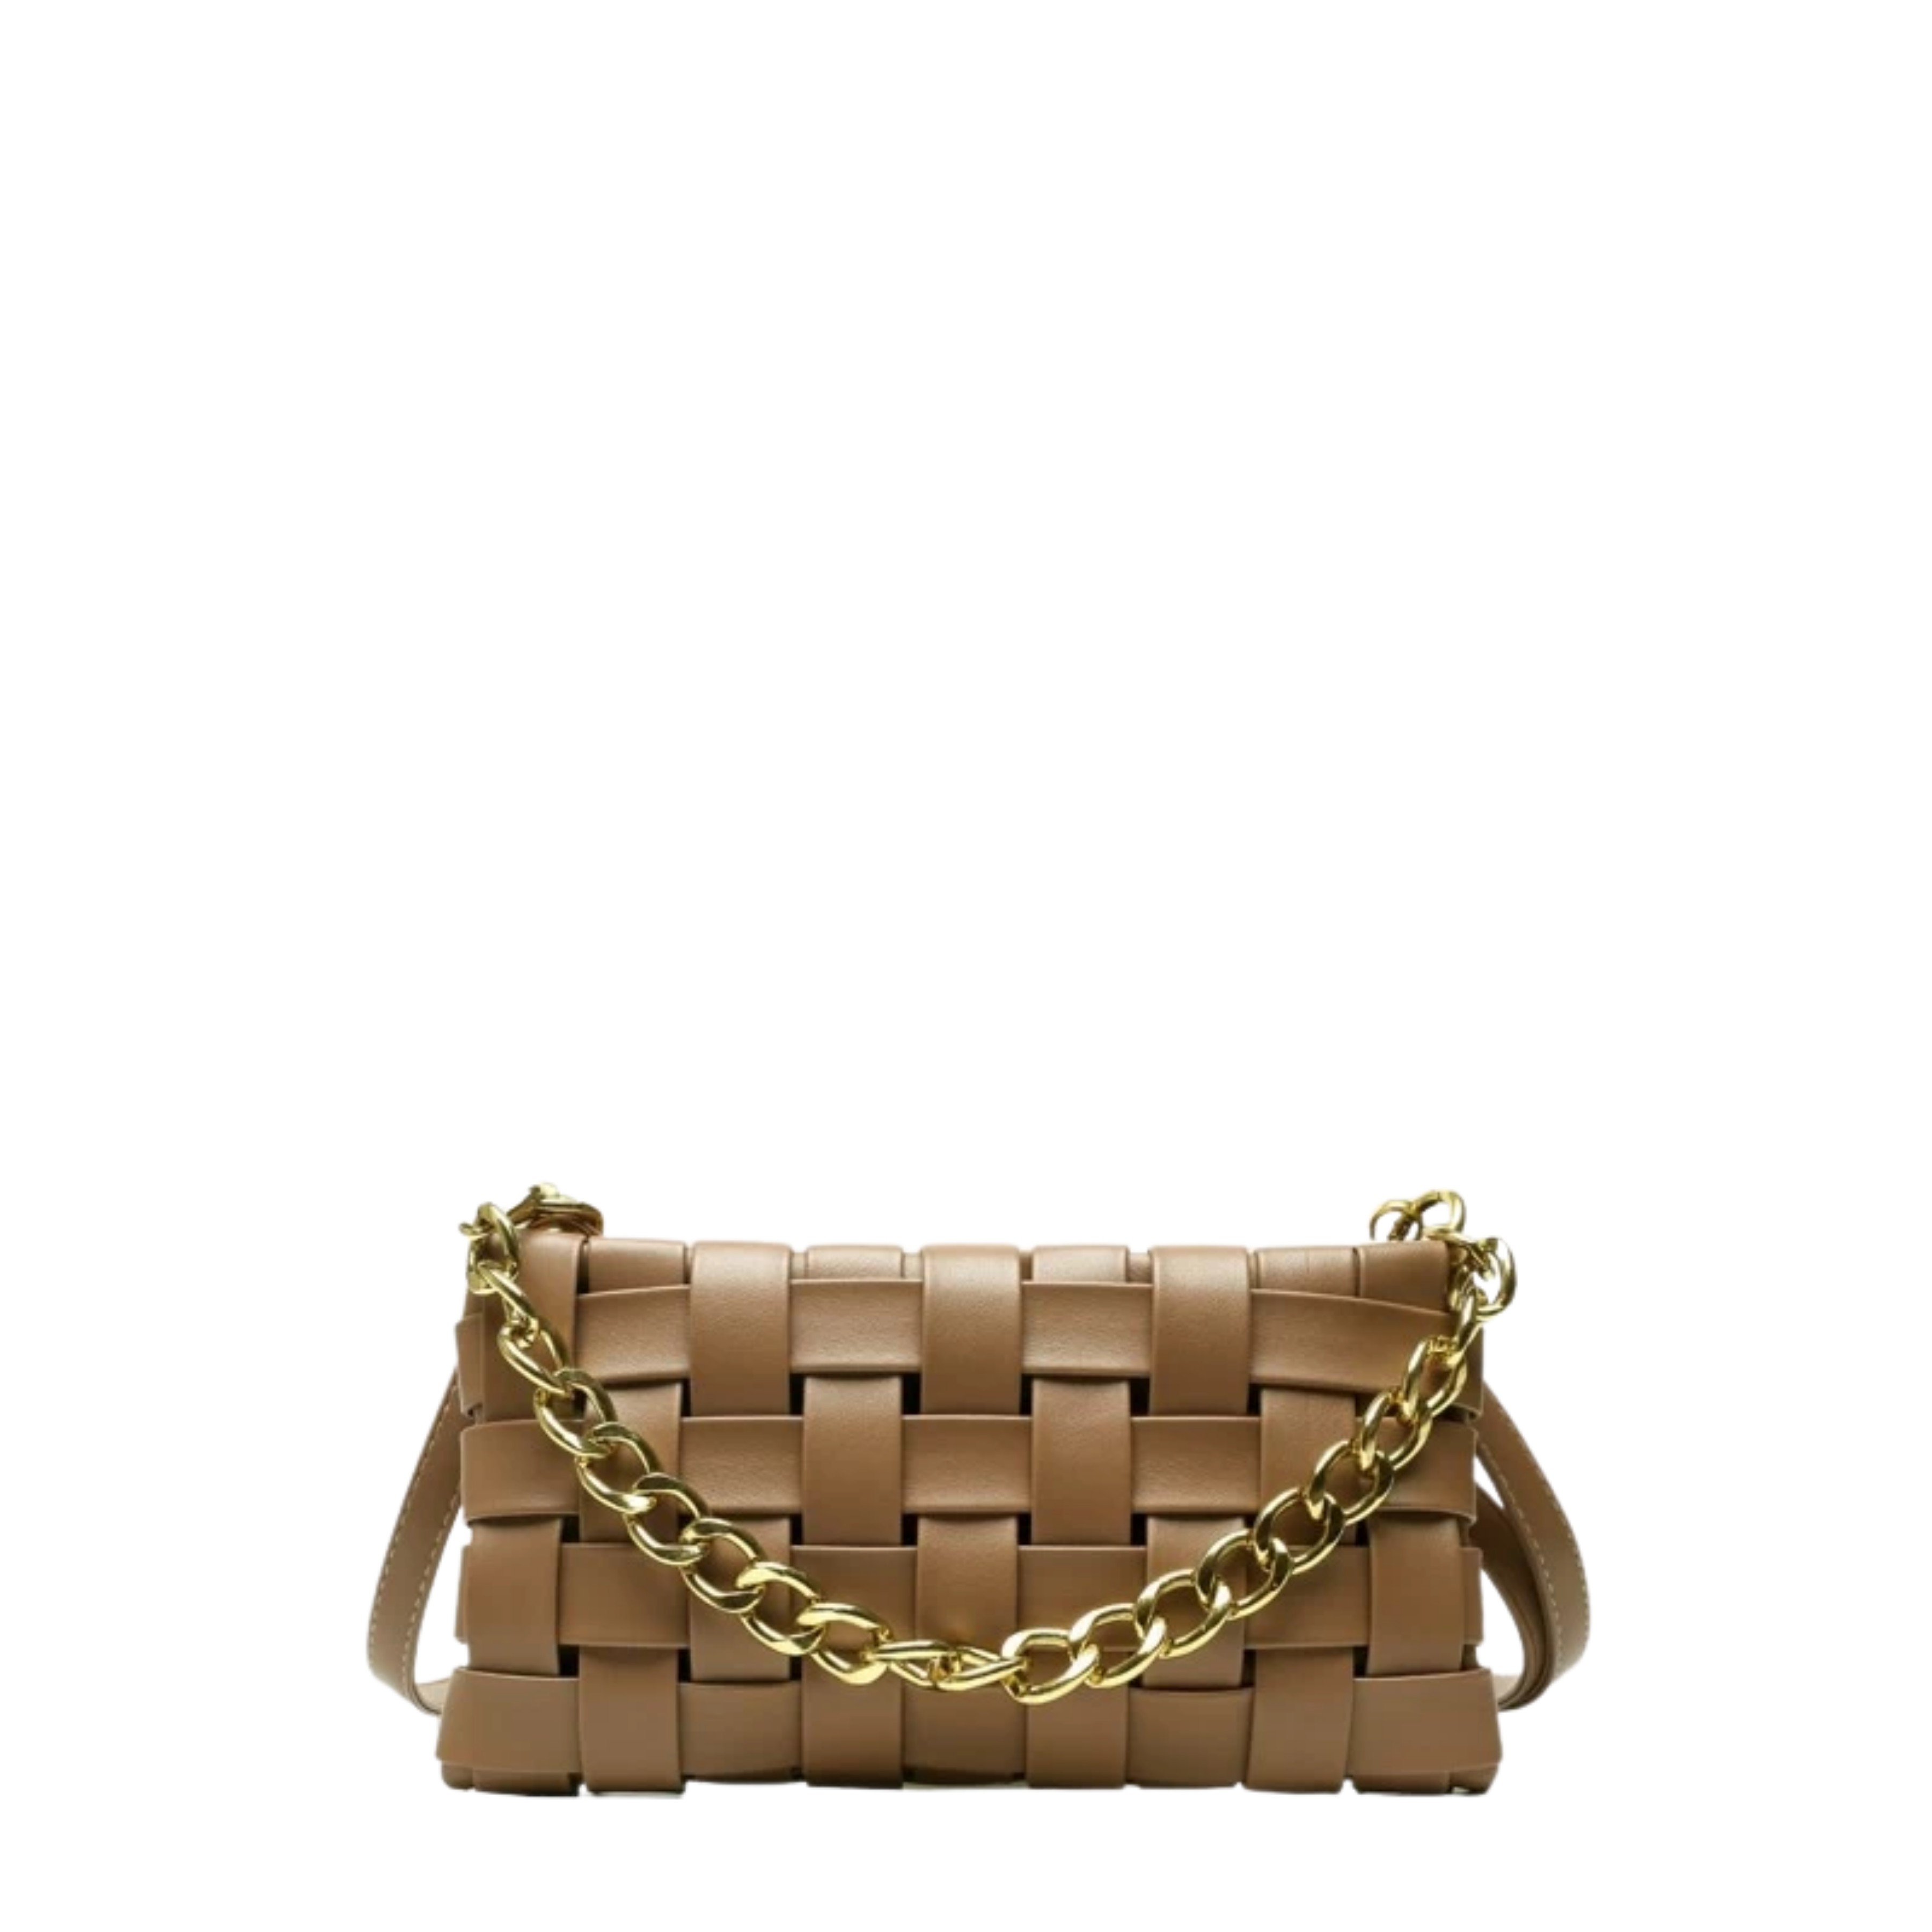 Coconut Shoulder Bag Bag with Marble Chain